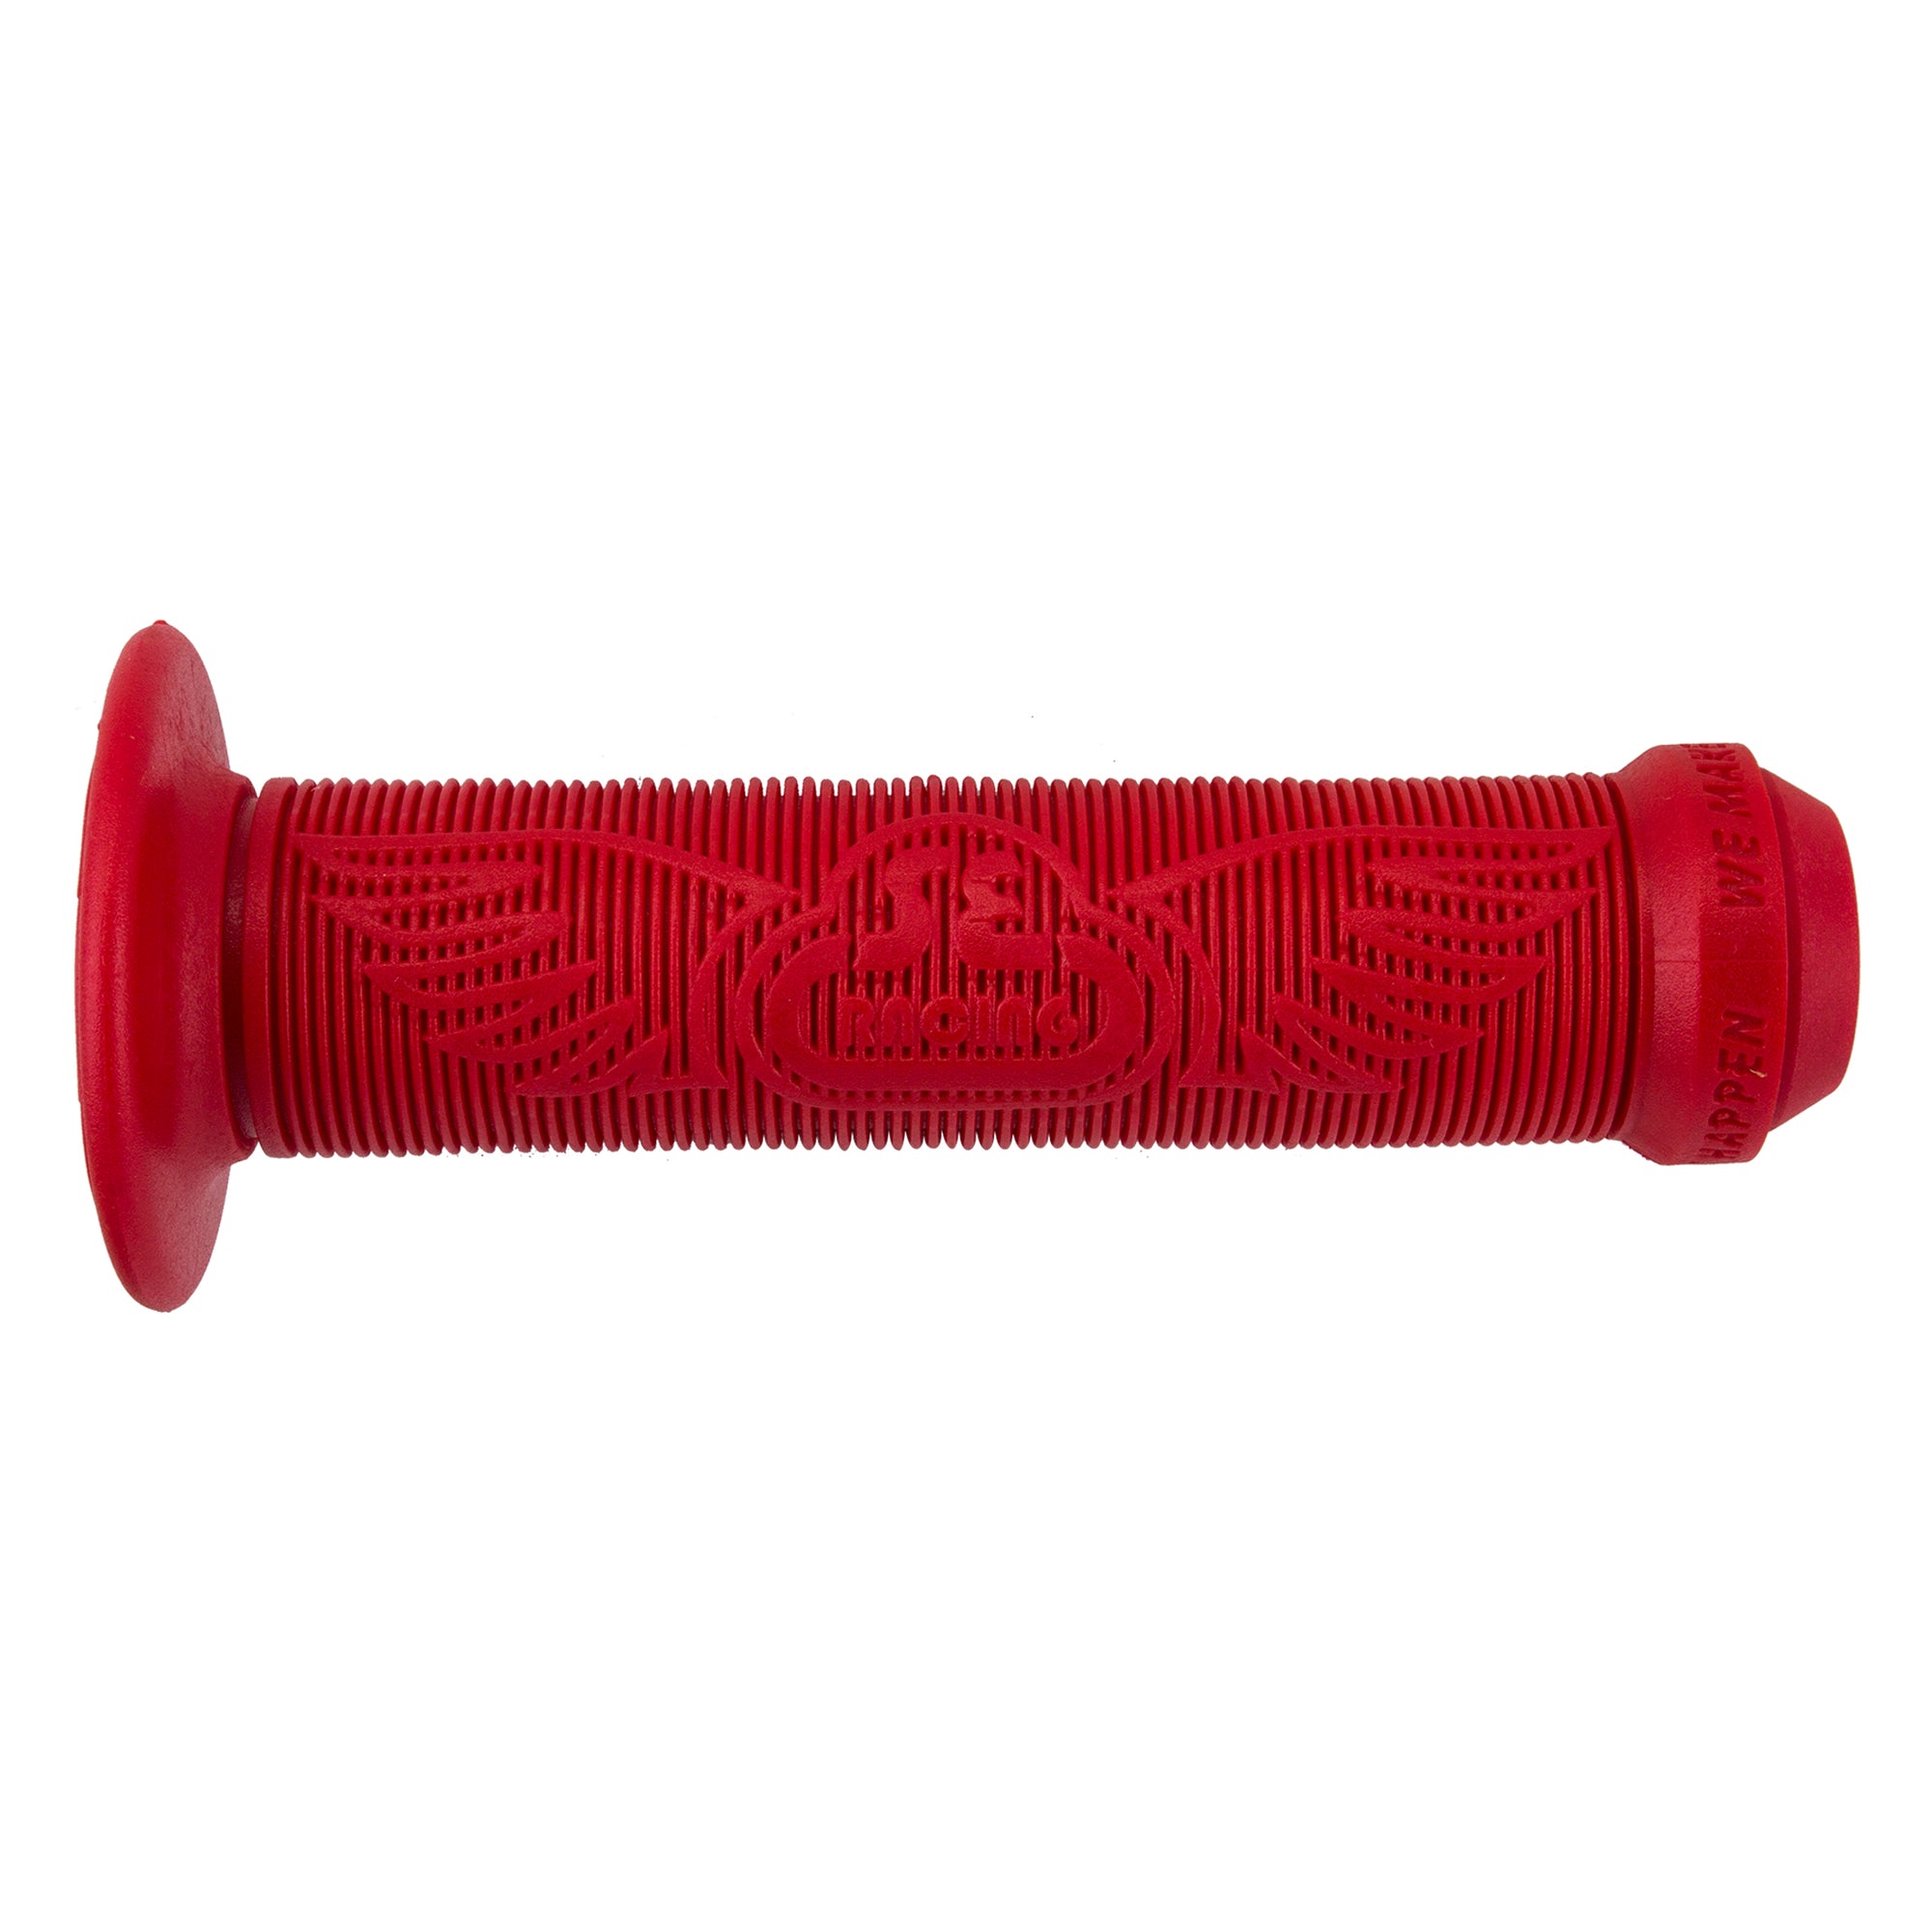 SE Wing Flanged Grip (Various Colors)